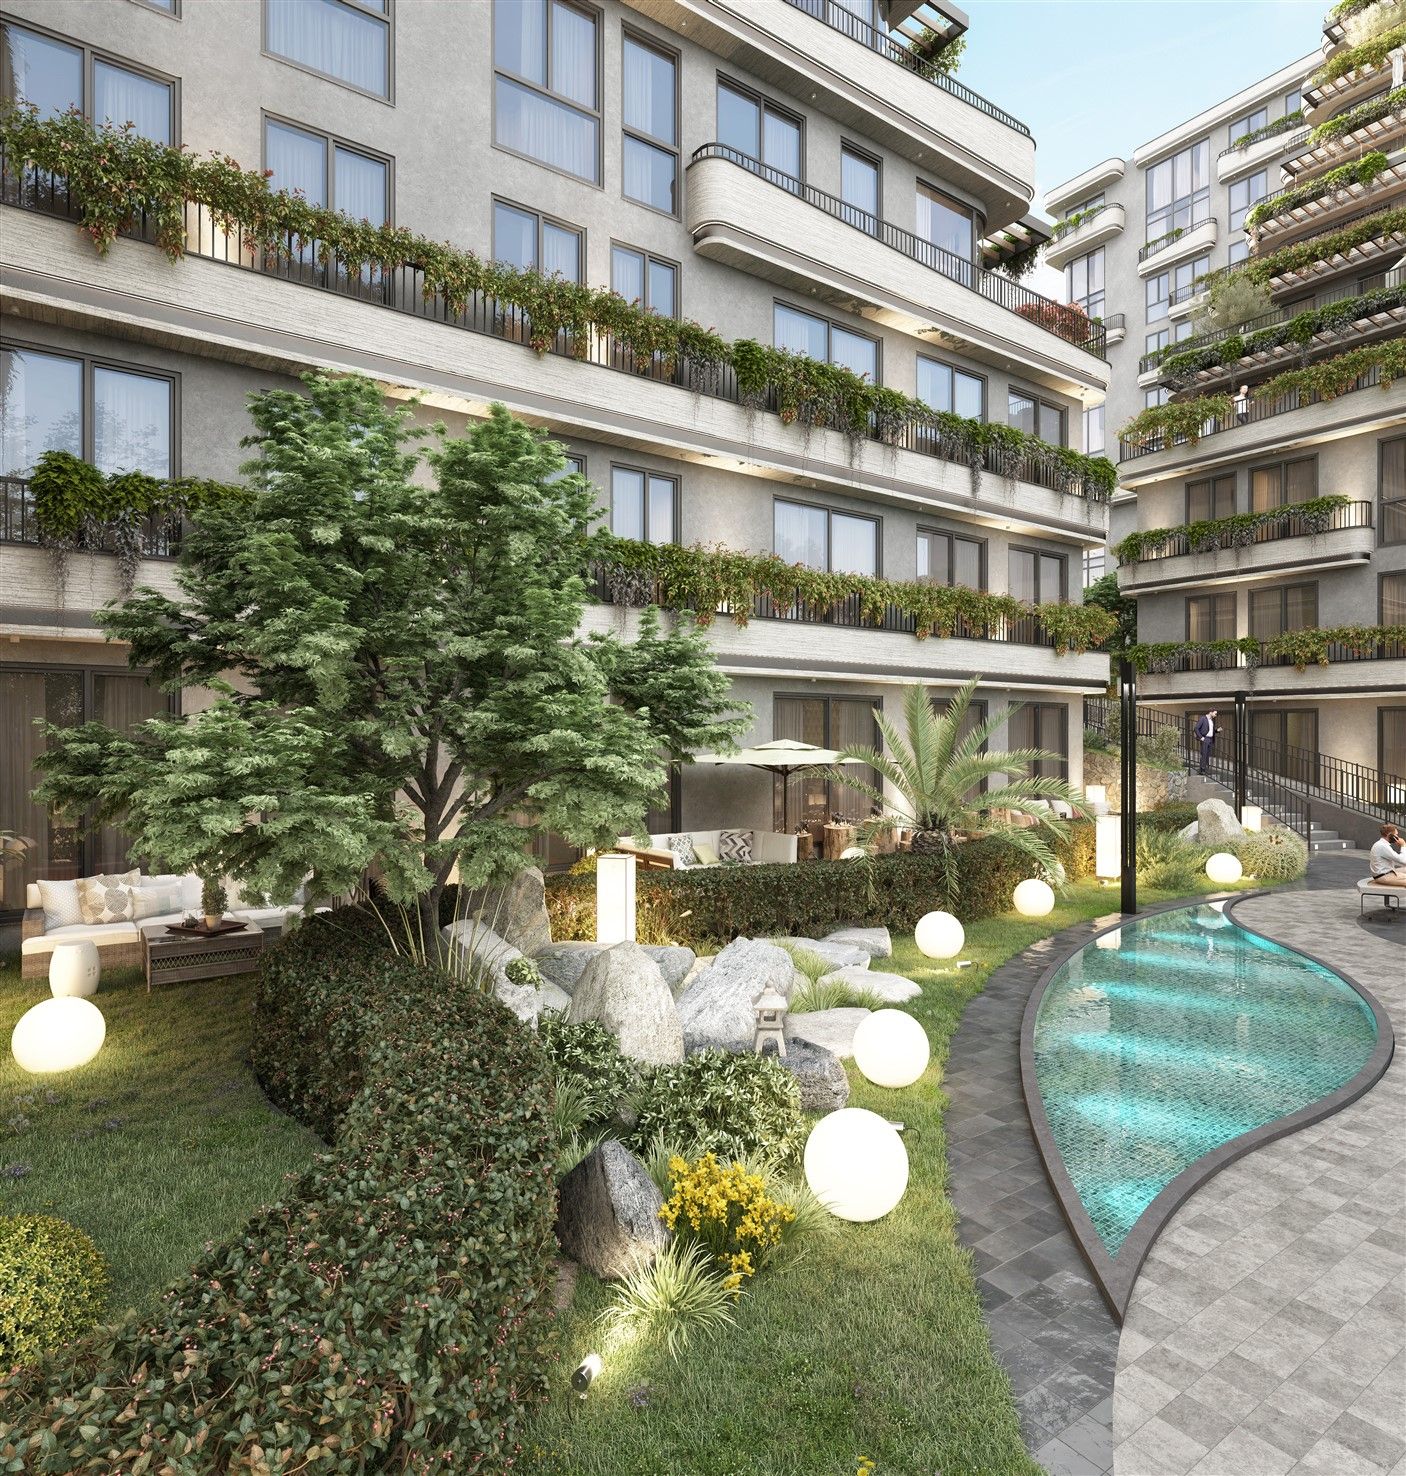 Project with a prime location in the picturesque Üsküdar district